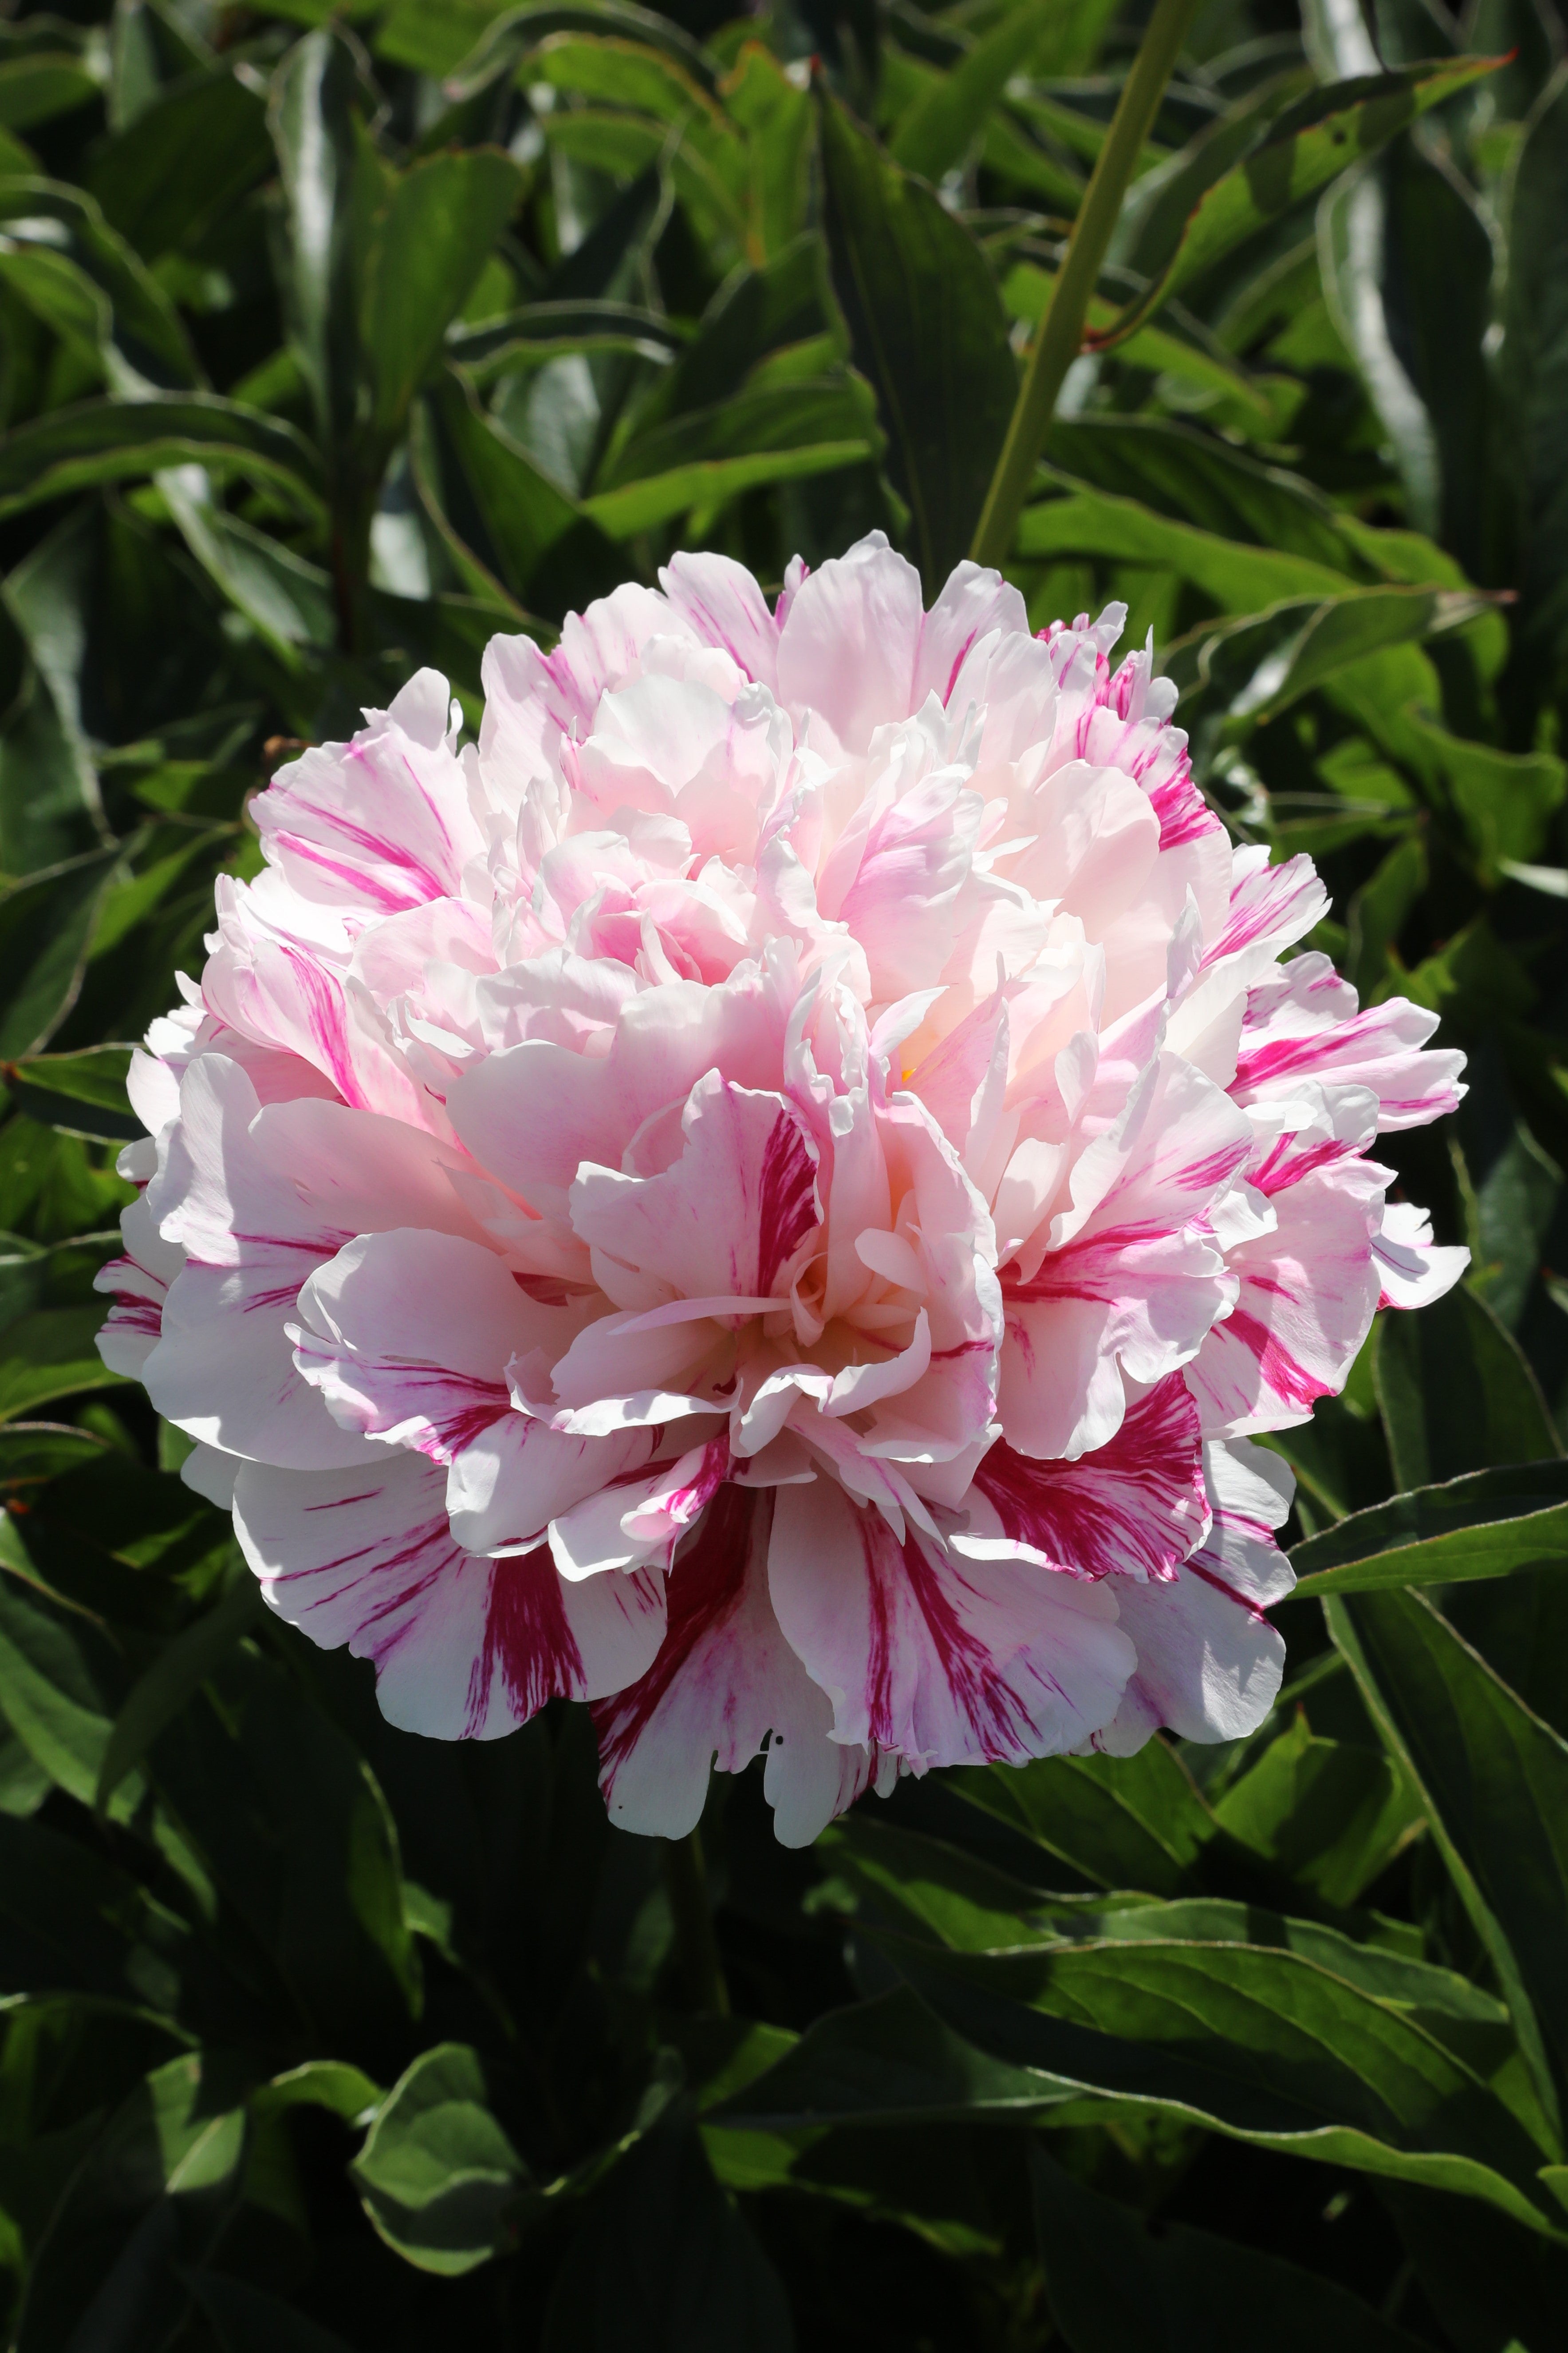 Enchanting Candy Stripe peony: nature's candy-colored masterpiece with green background